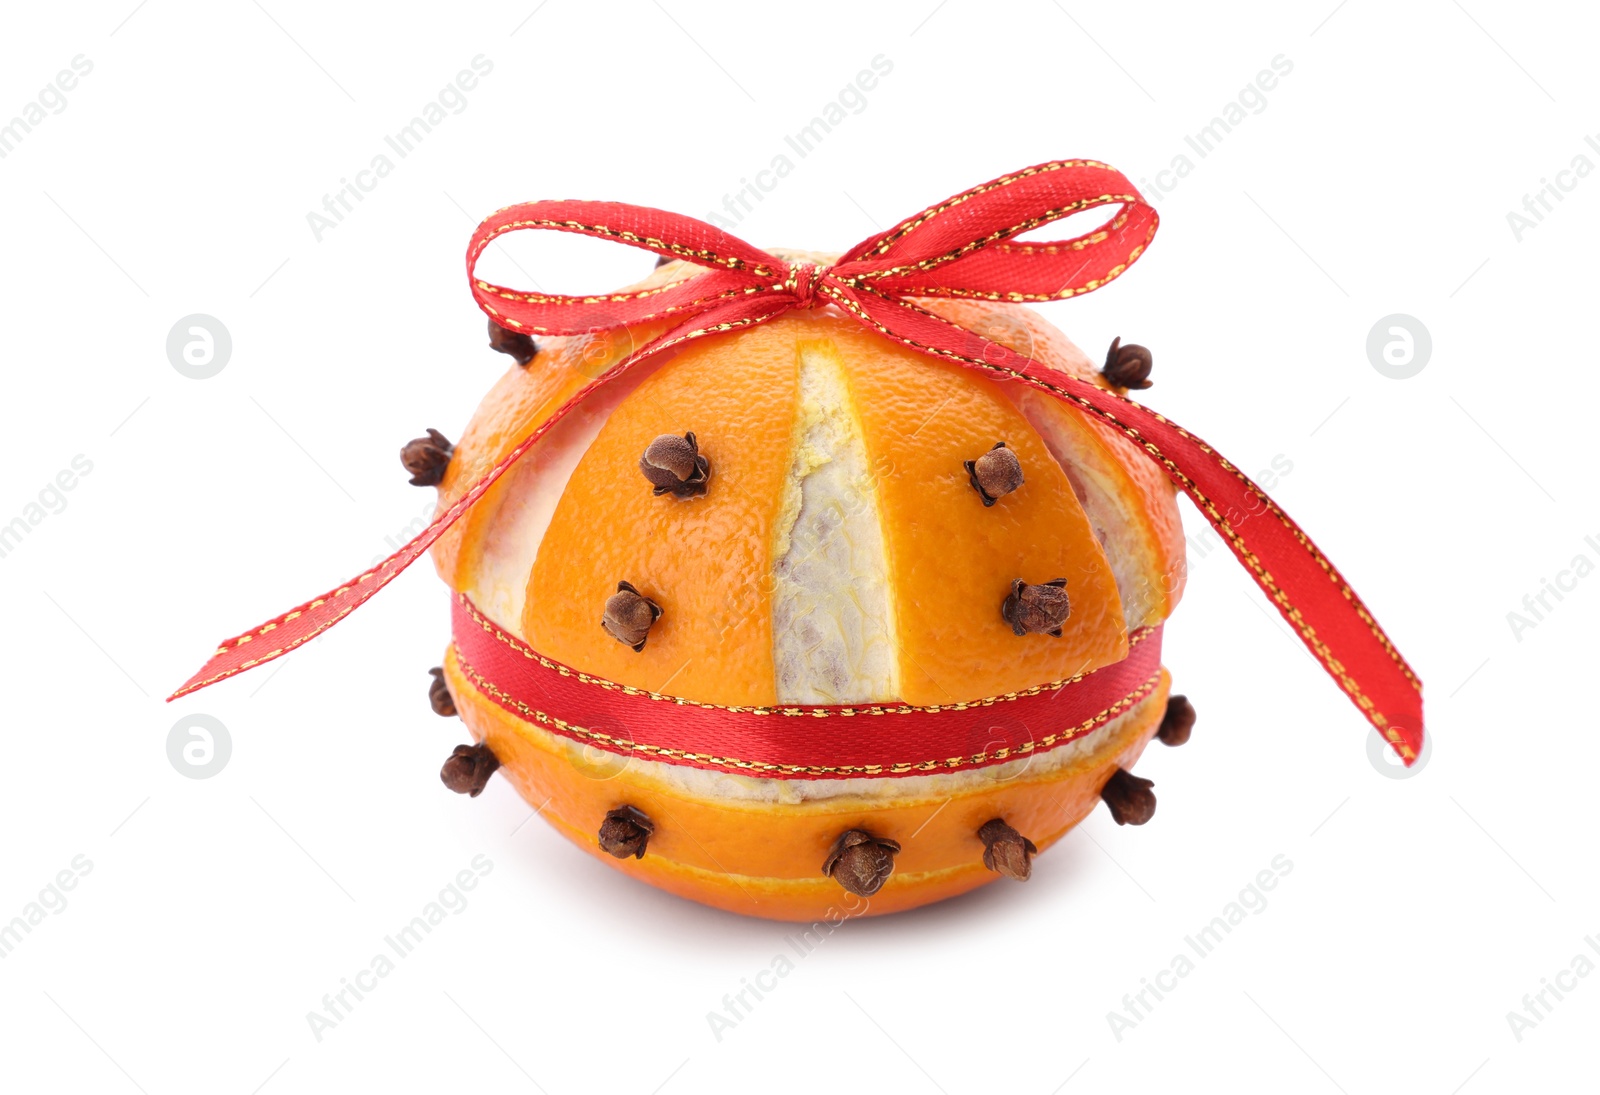 Photo of Pomander ball with red ribbon made of fresh tangerine and cloves isolated on white